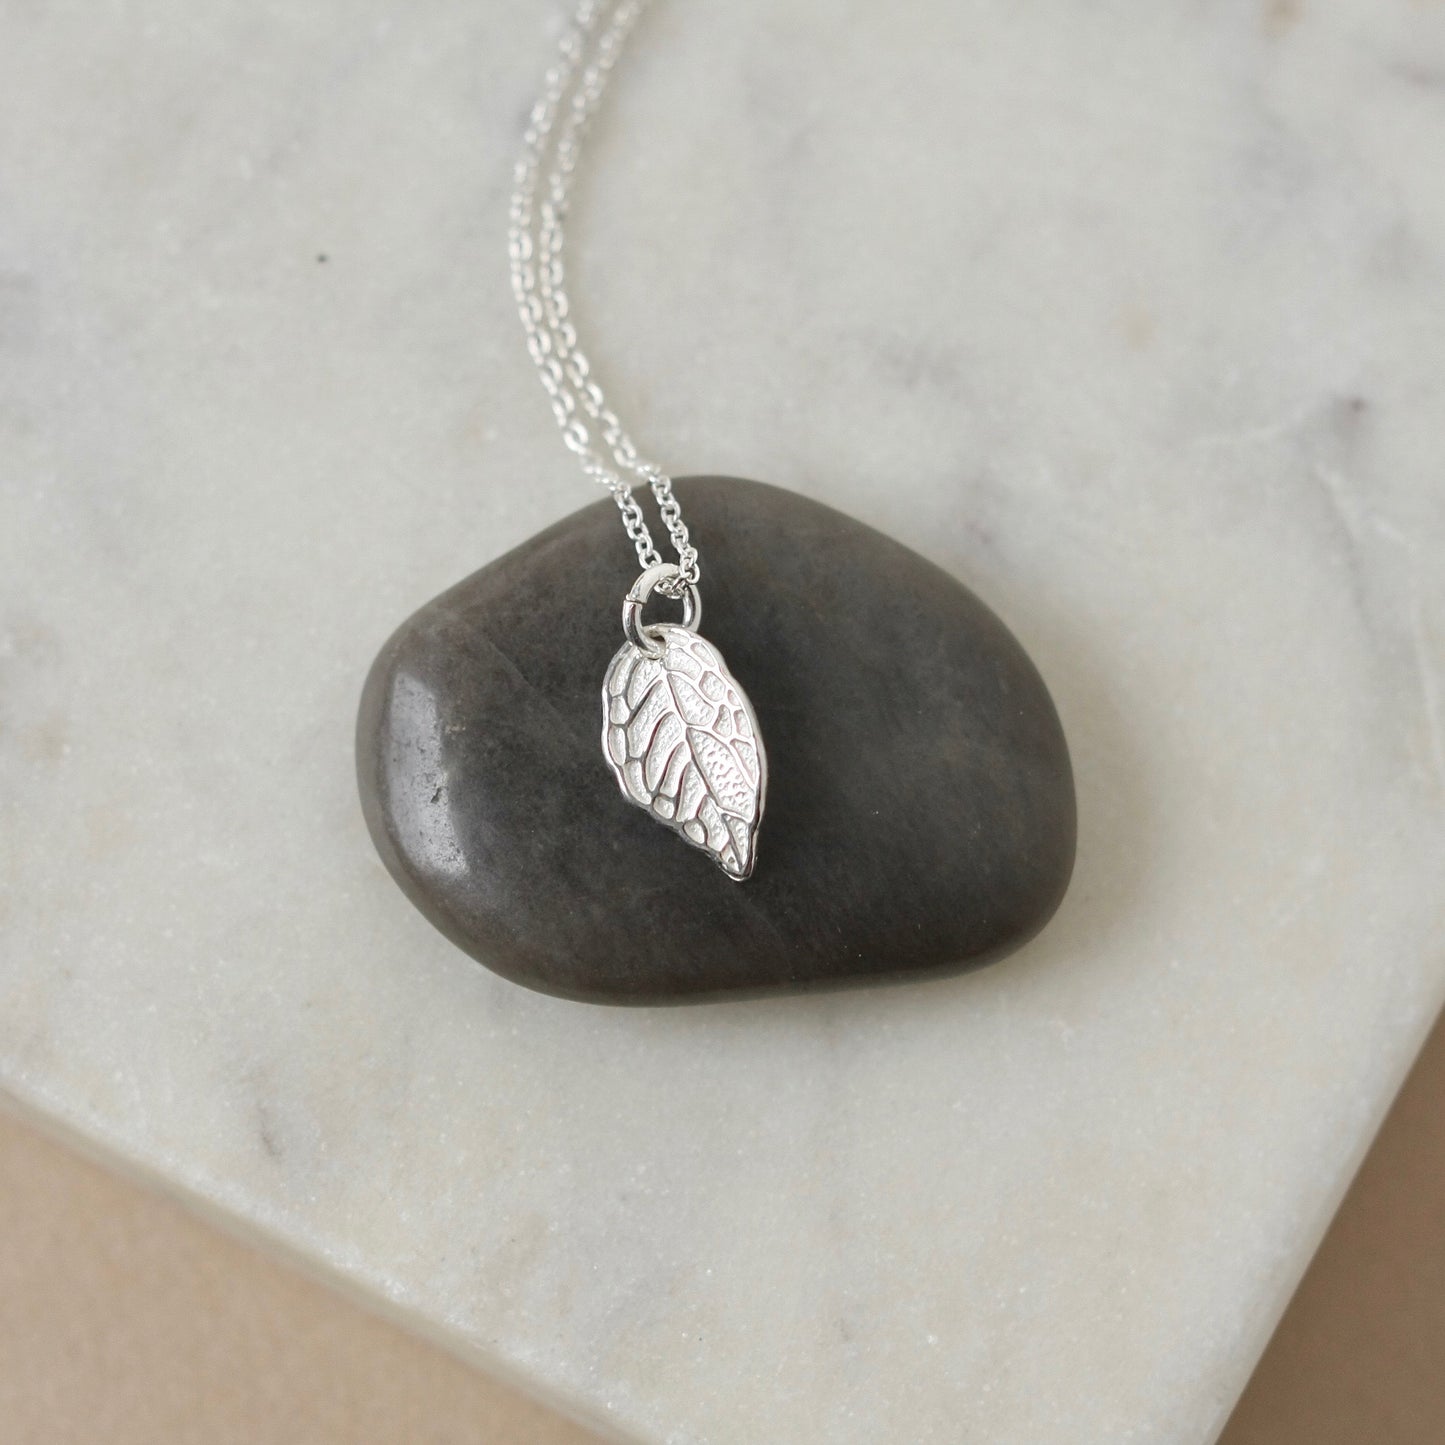 SALE Small Sterling Silver Leaf Necklace